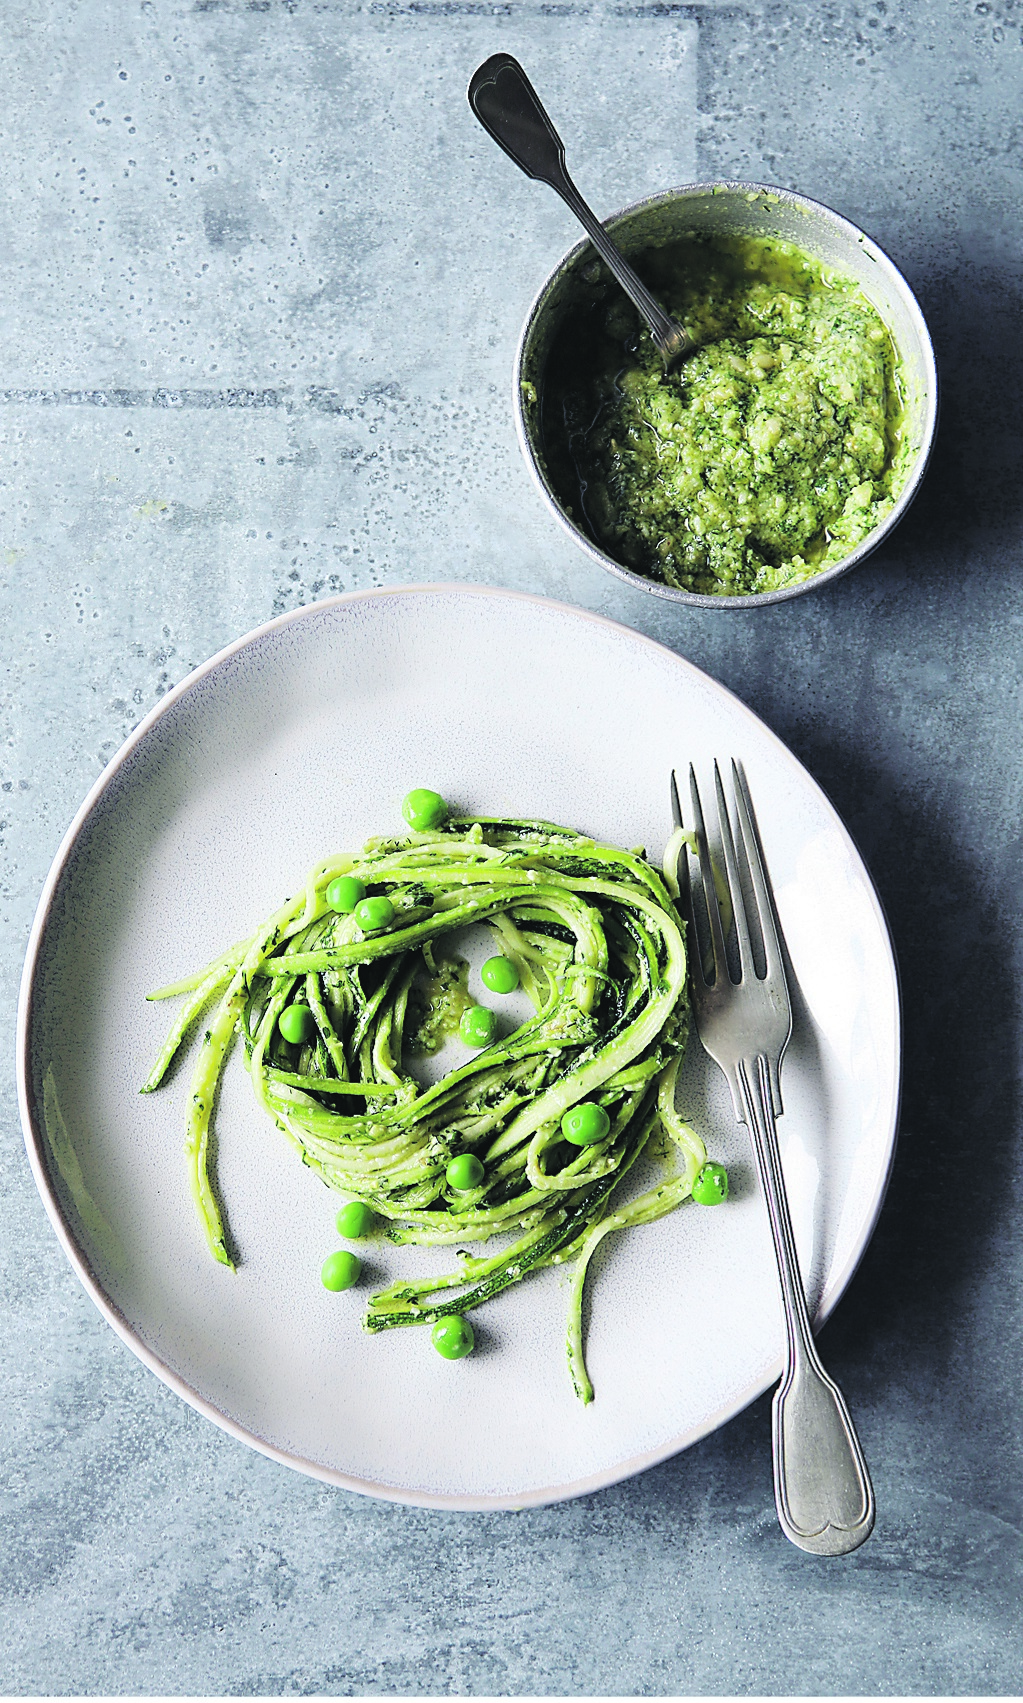 Courgette noodles with pesto and green peas 